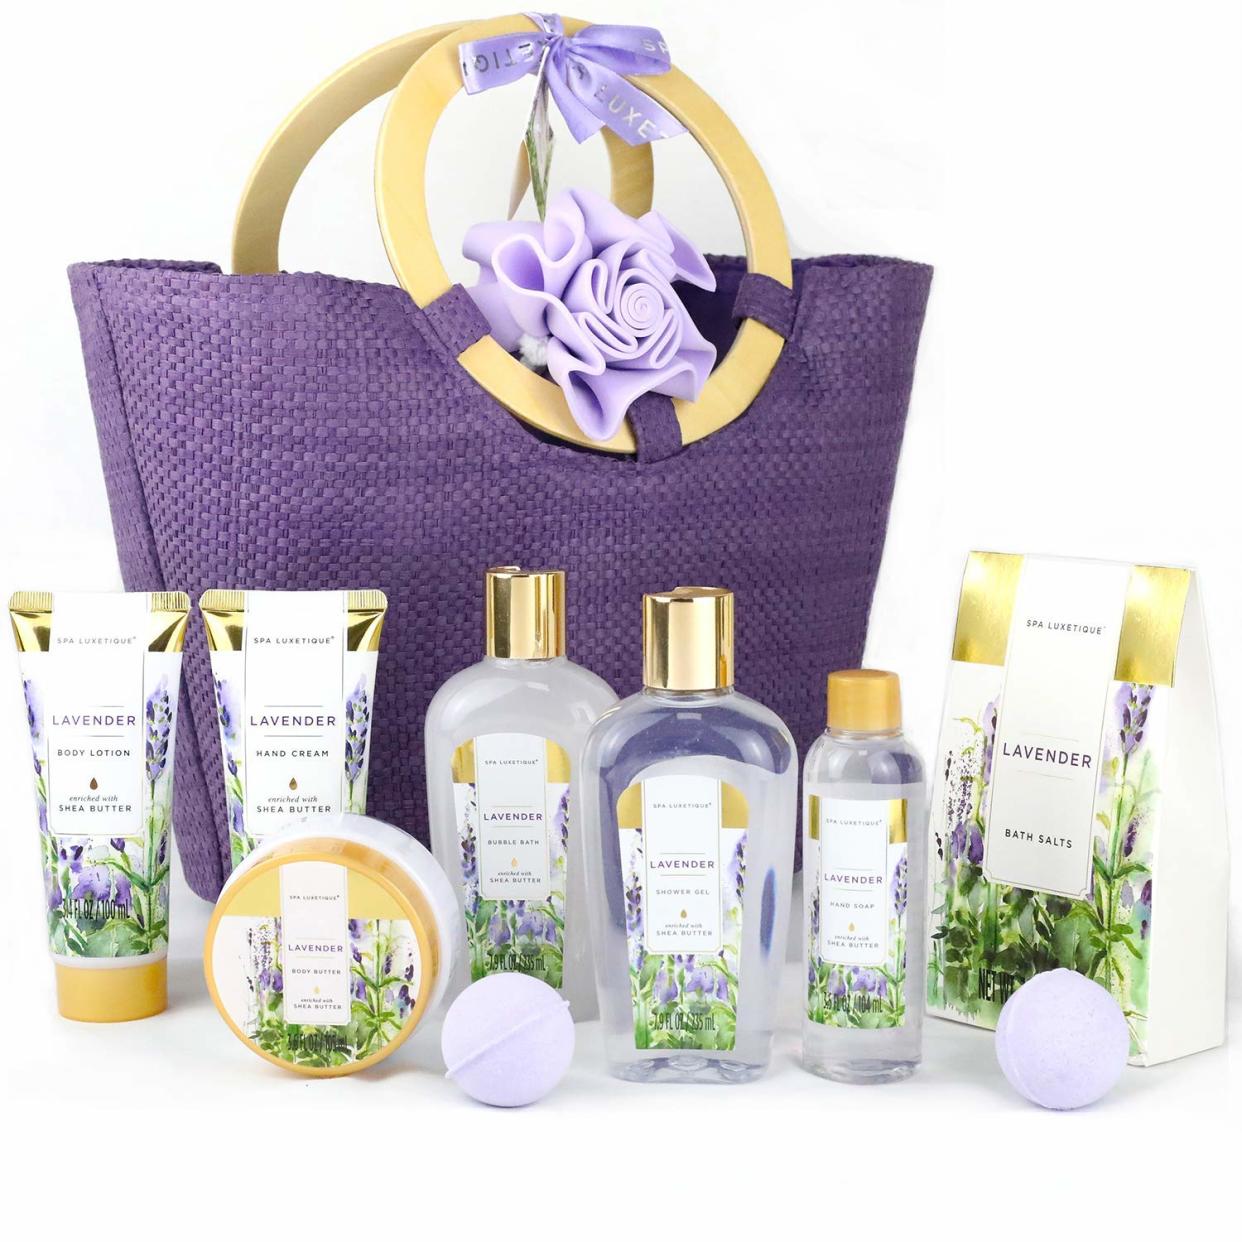 spa luxetique spa gift basket, gifts for mom